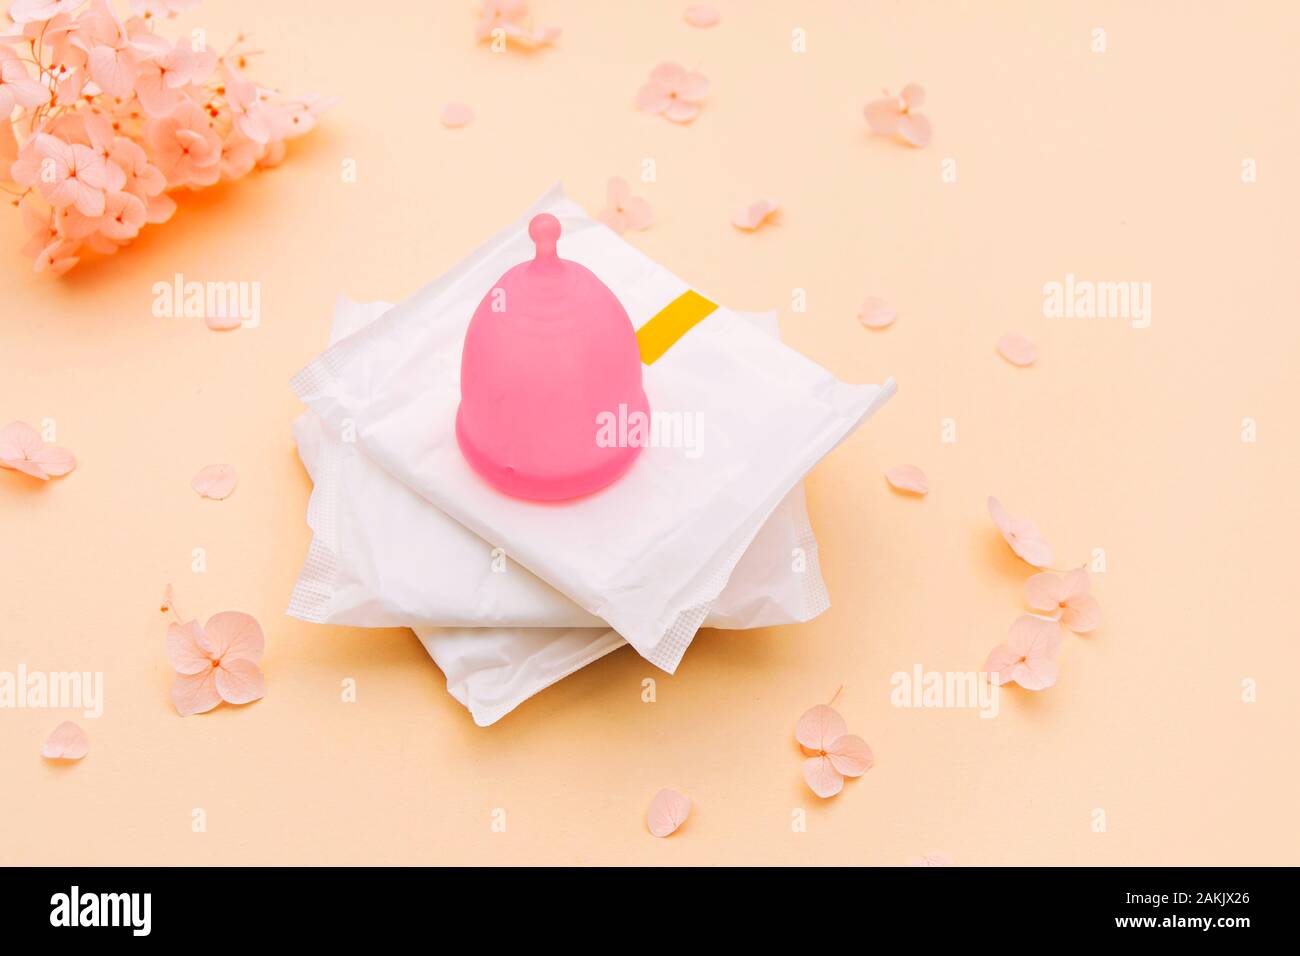 Feminine hygiene products - menstrual cup and sanitary pads on pale orange with hydrangea flowers on it Stock Photo - Alamy